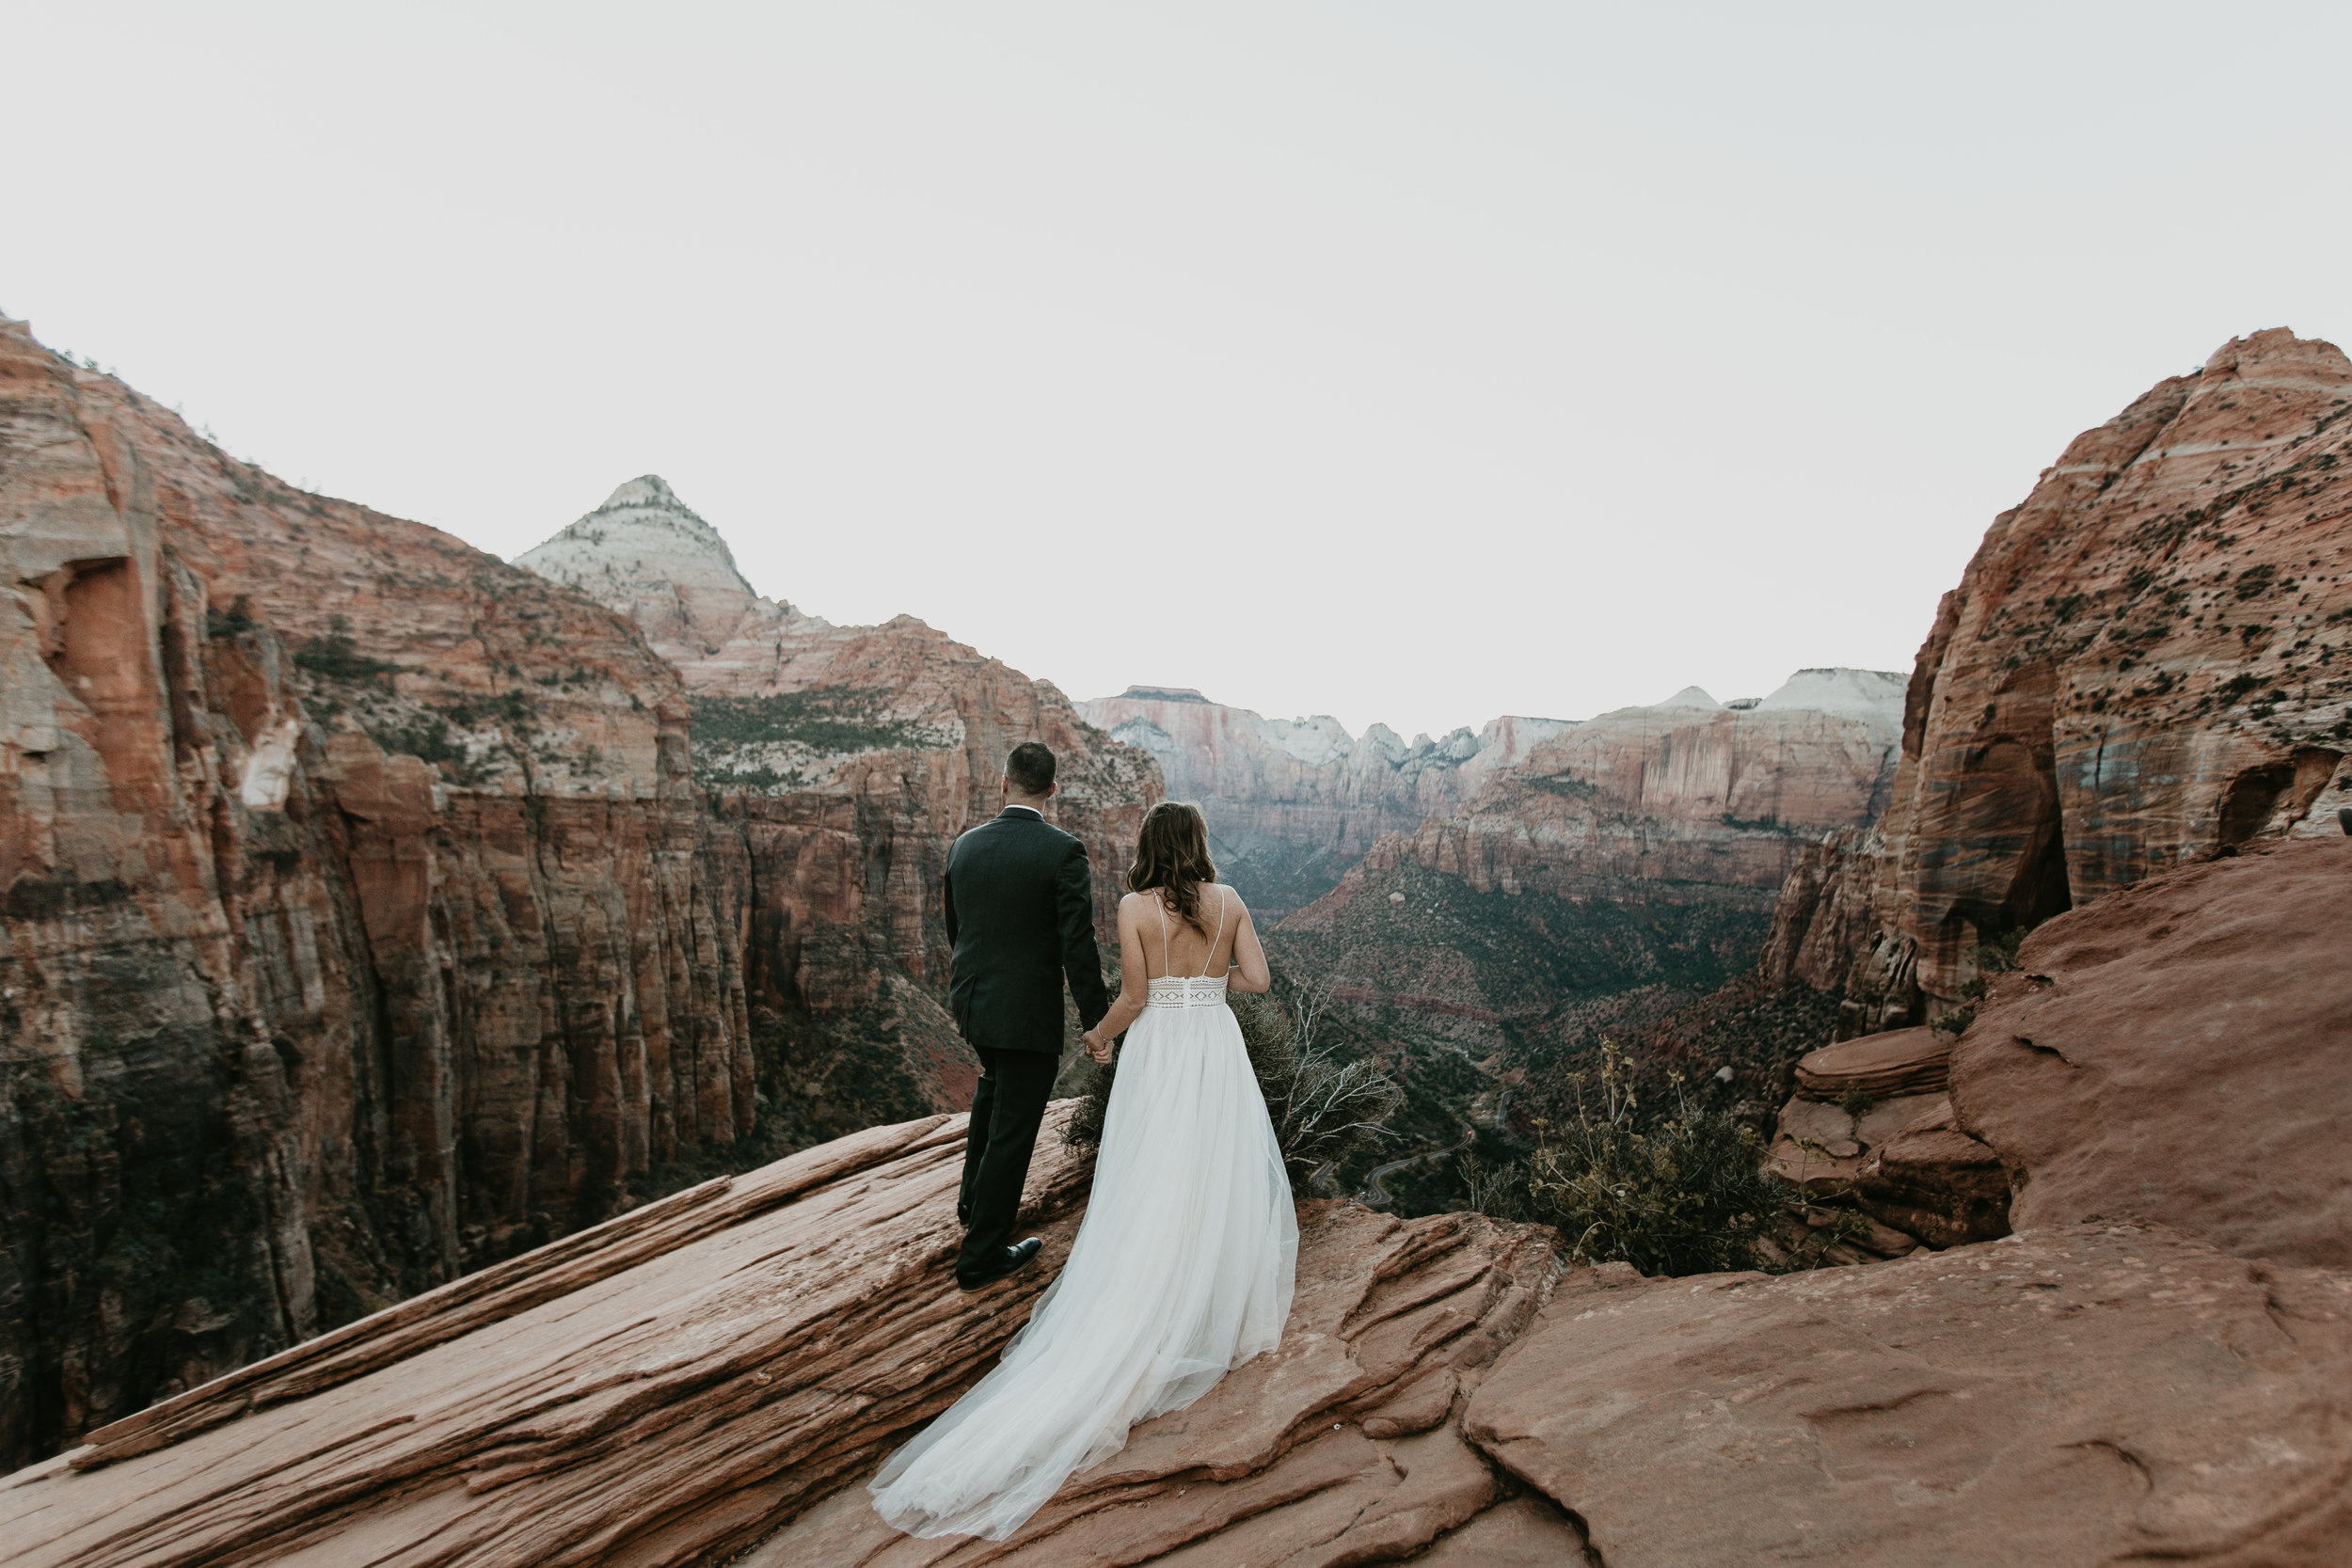 nicole-daacke-photography-zion-national-park-elopement-photographer-canyon-overlook-trail-elope-hiking-adventure-wedding-photos-fall-utah-red-rock-canyon-stgeorge-eloping-photographer-77.jpg